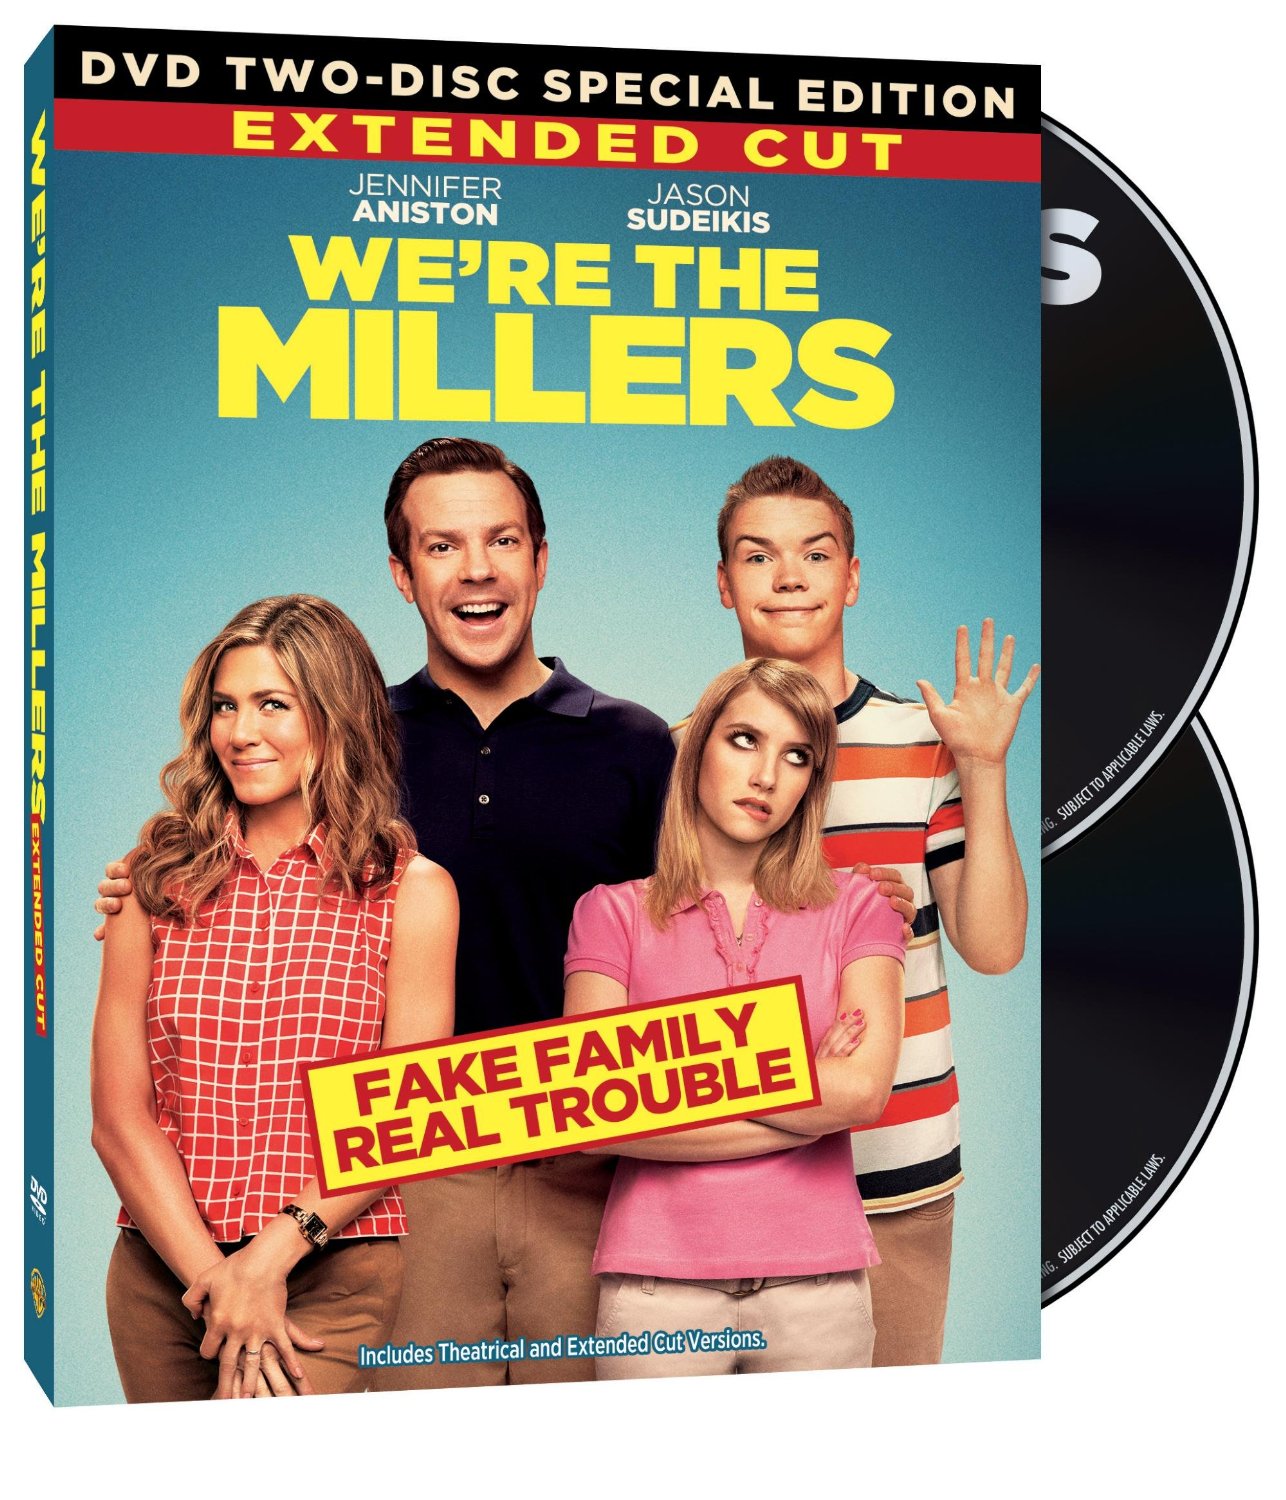 We’re the Millers (DVD + UltraViolet) Only $9.99